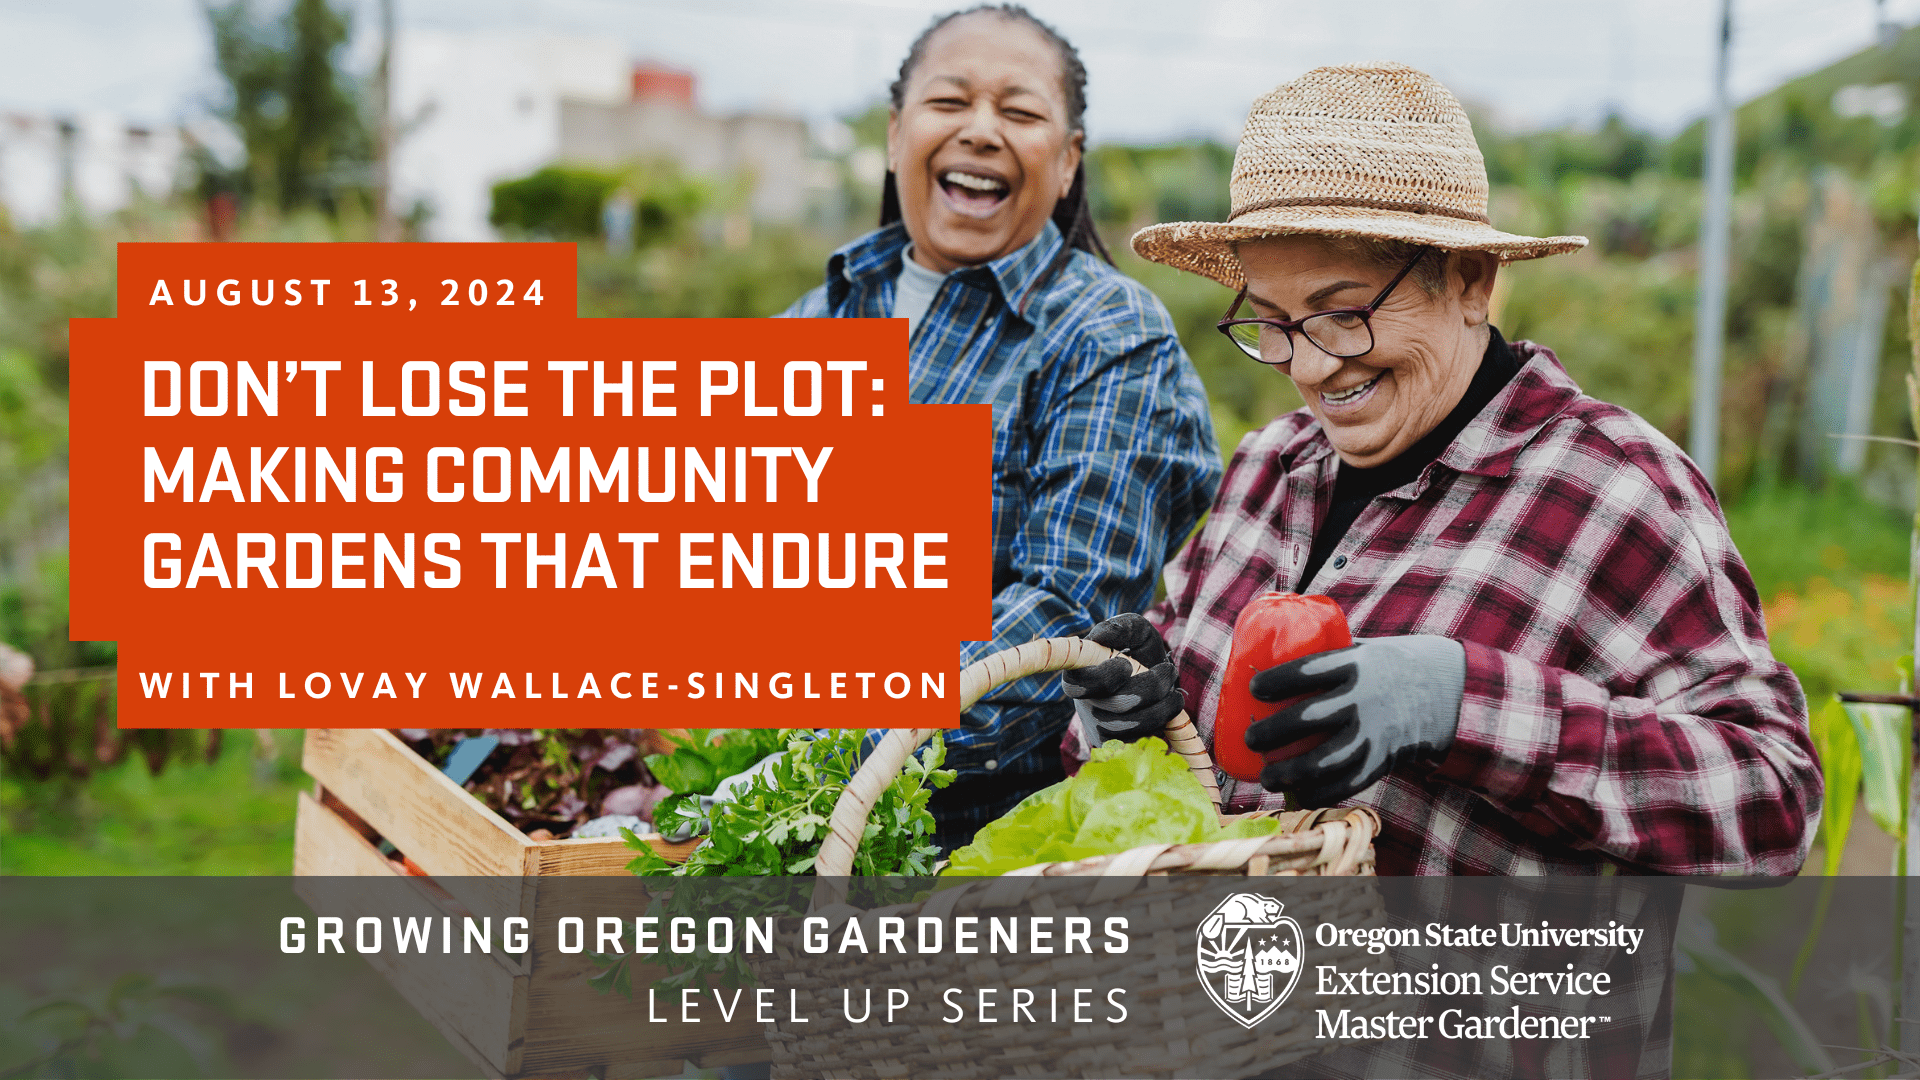 Don't lose the plot: making community gardens that endure. Two people in garden smiling, carrying produce baskets.